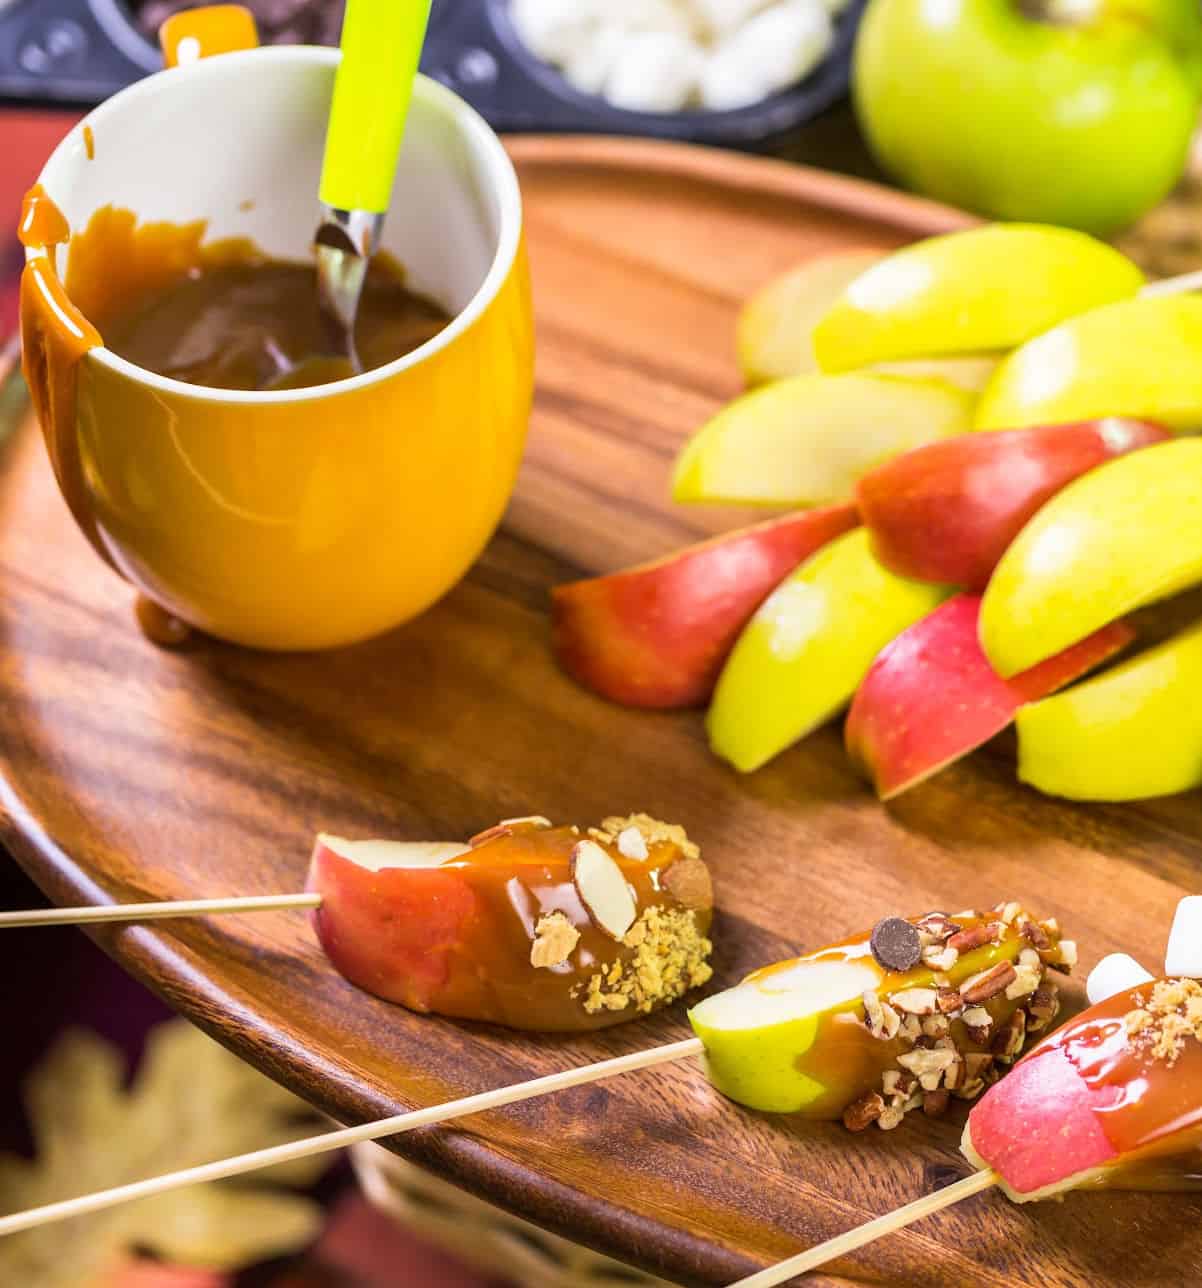 apple slices dipped in caramel and coated in nuts